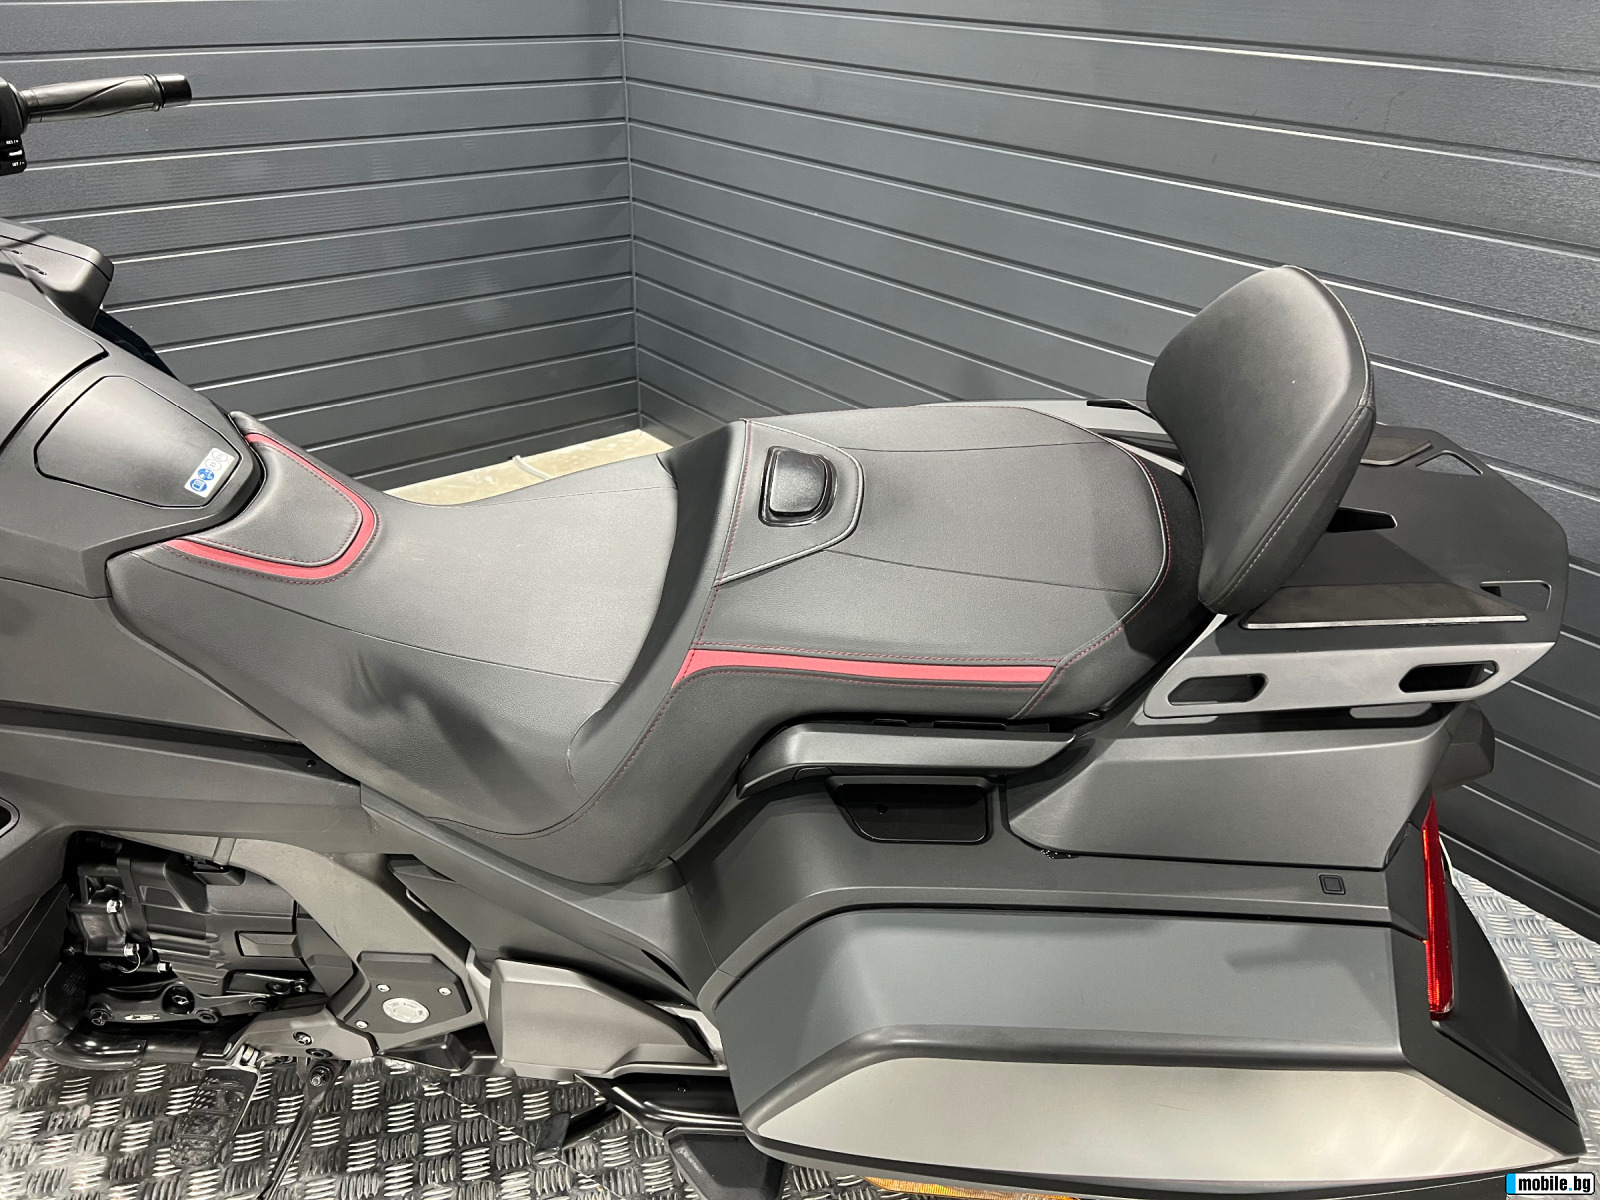 Honda Gold Wing DCT 2020 LIMITED EDITION | Mobile.bg   11